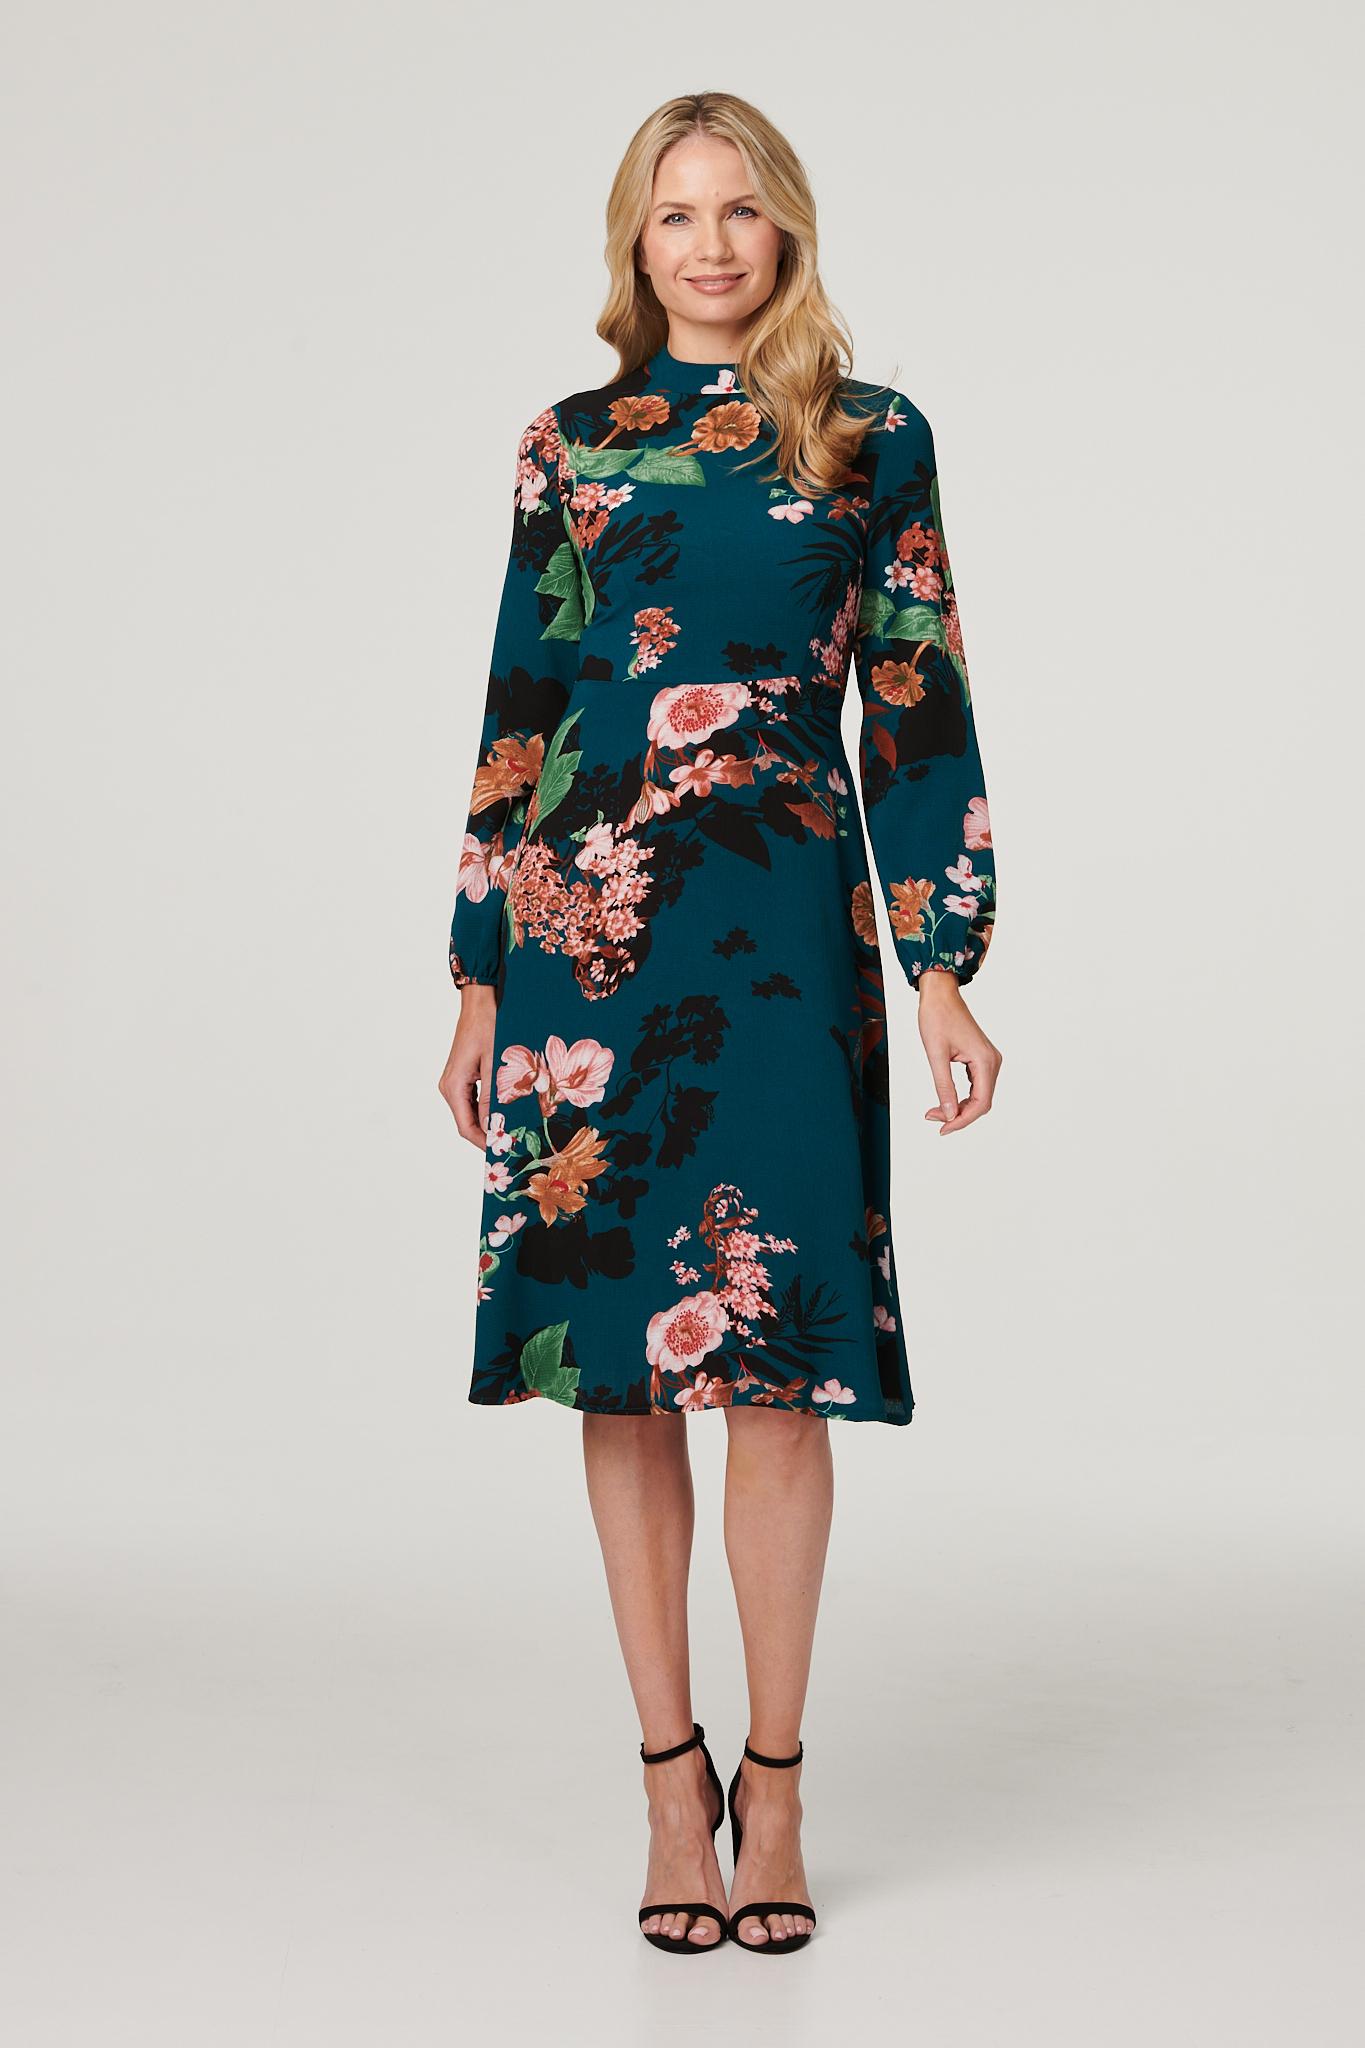 Teal | Floral High Neck Midi Dress : Model is 5'10"/178 cm and wears UK10/EU38/US6/AUS10